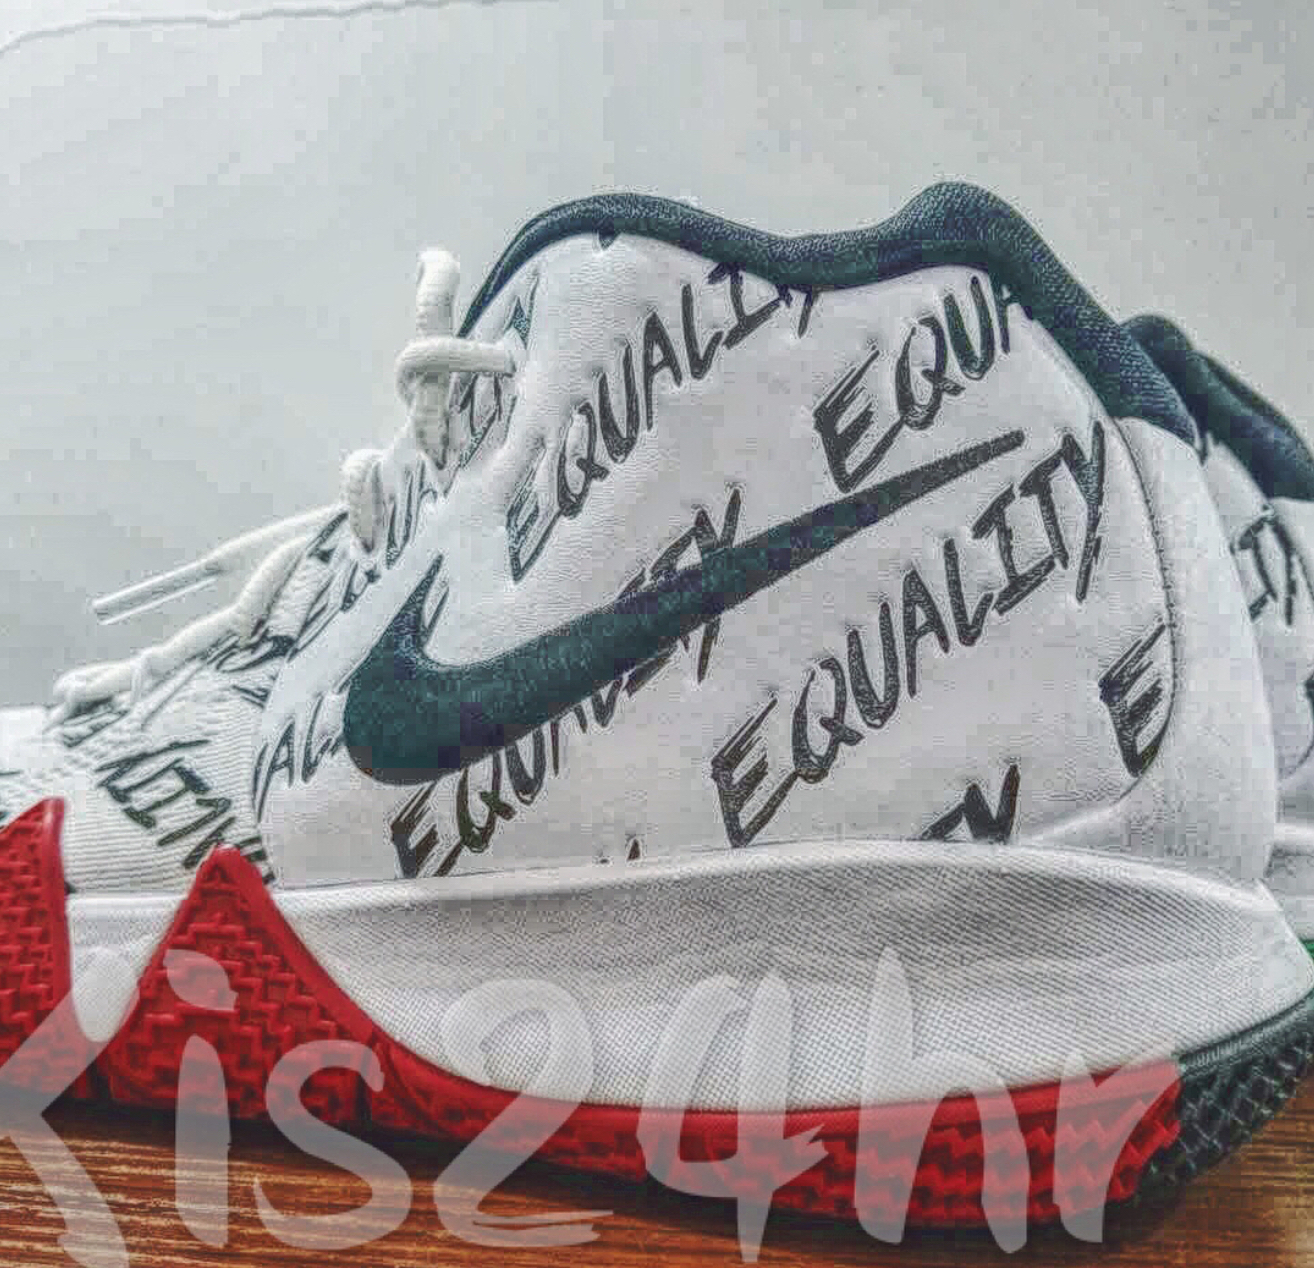 kyrie shoes equality